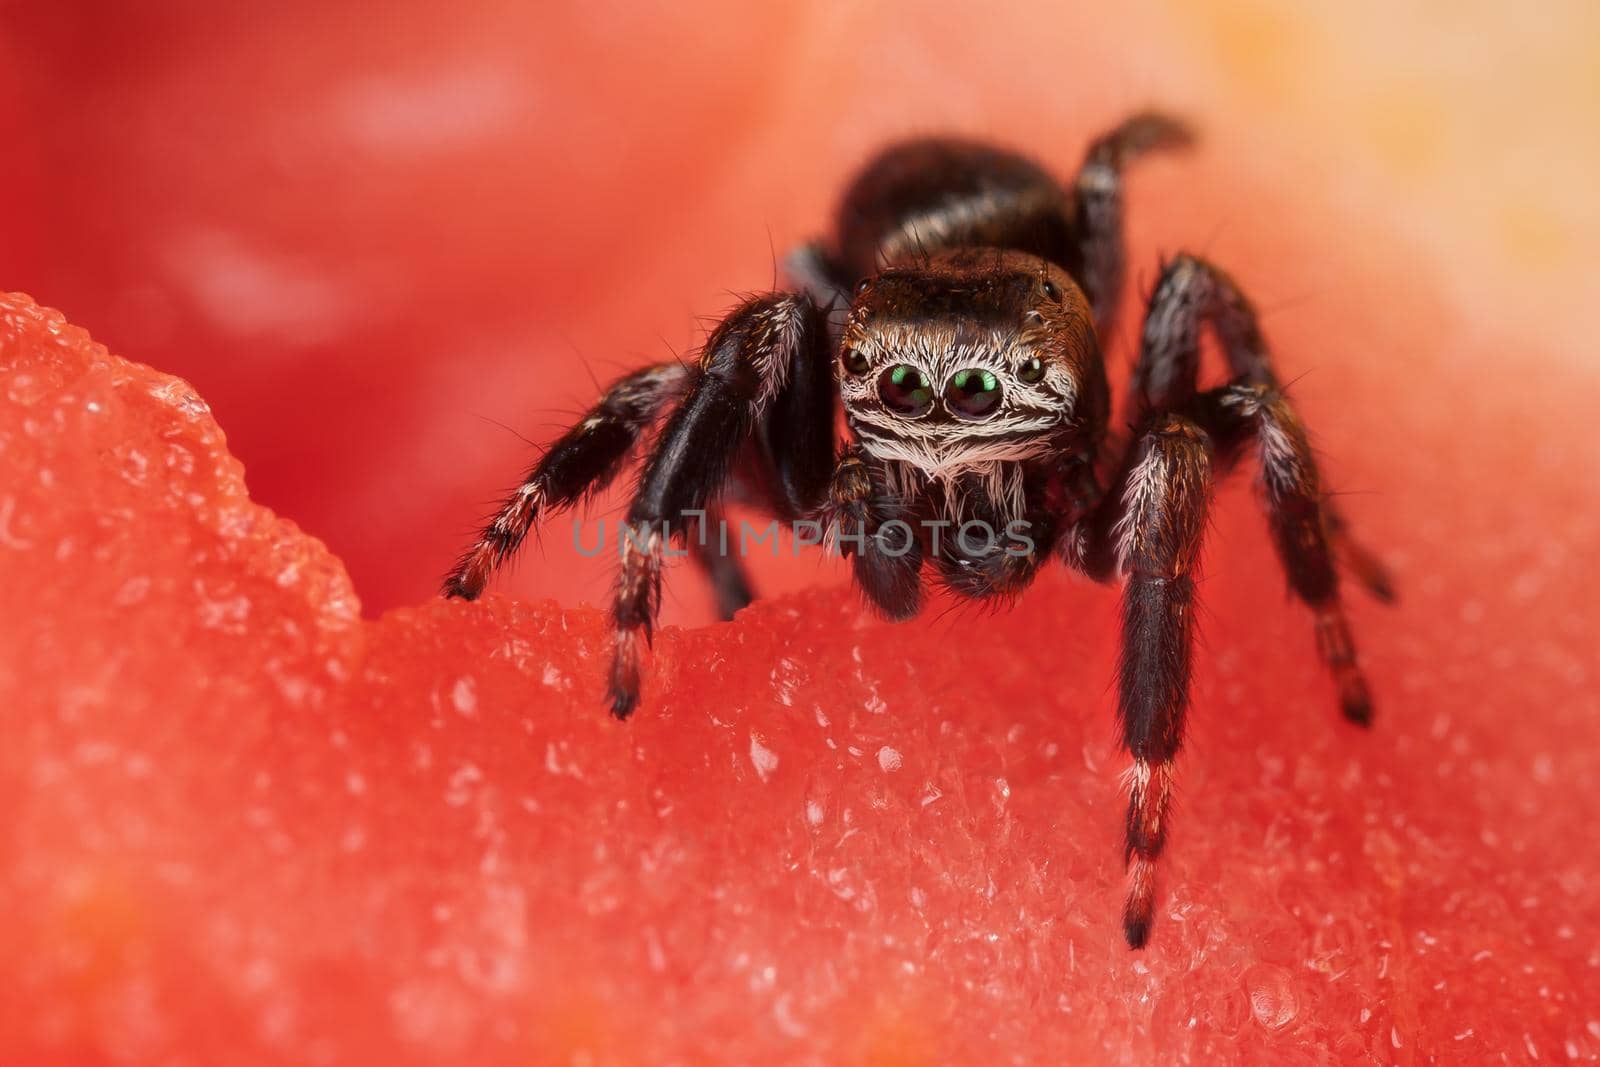 Jumping spider on the tomato, like in a beautiful red scene